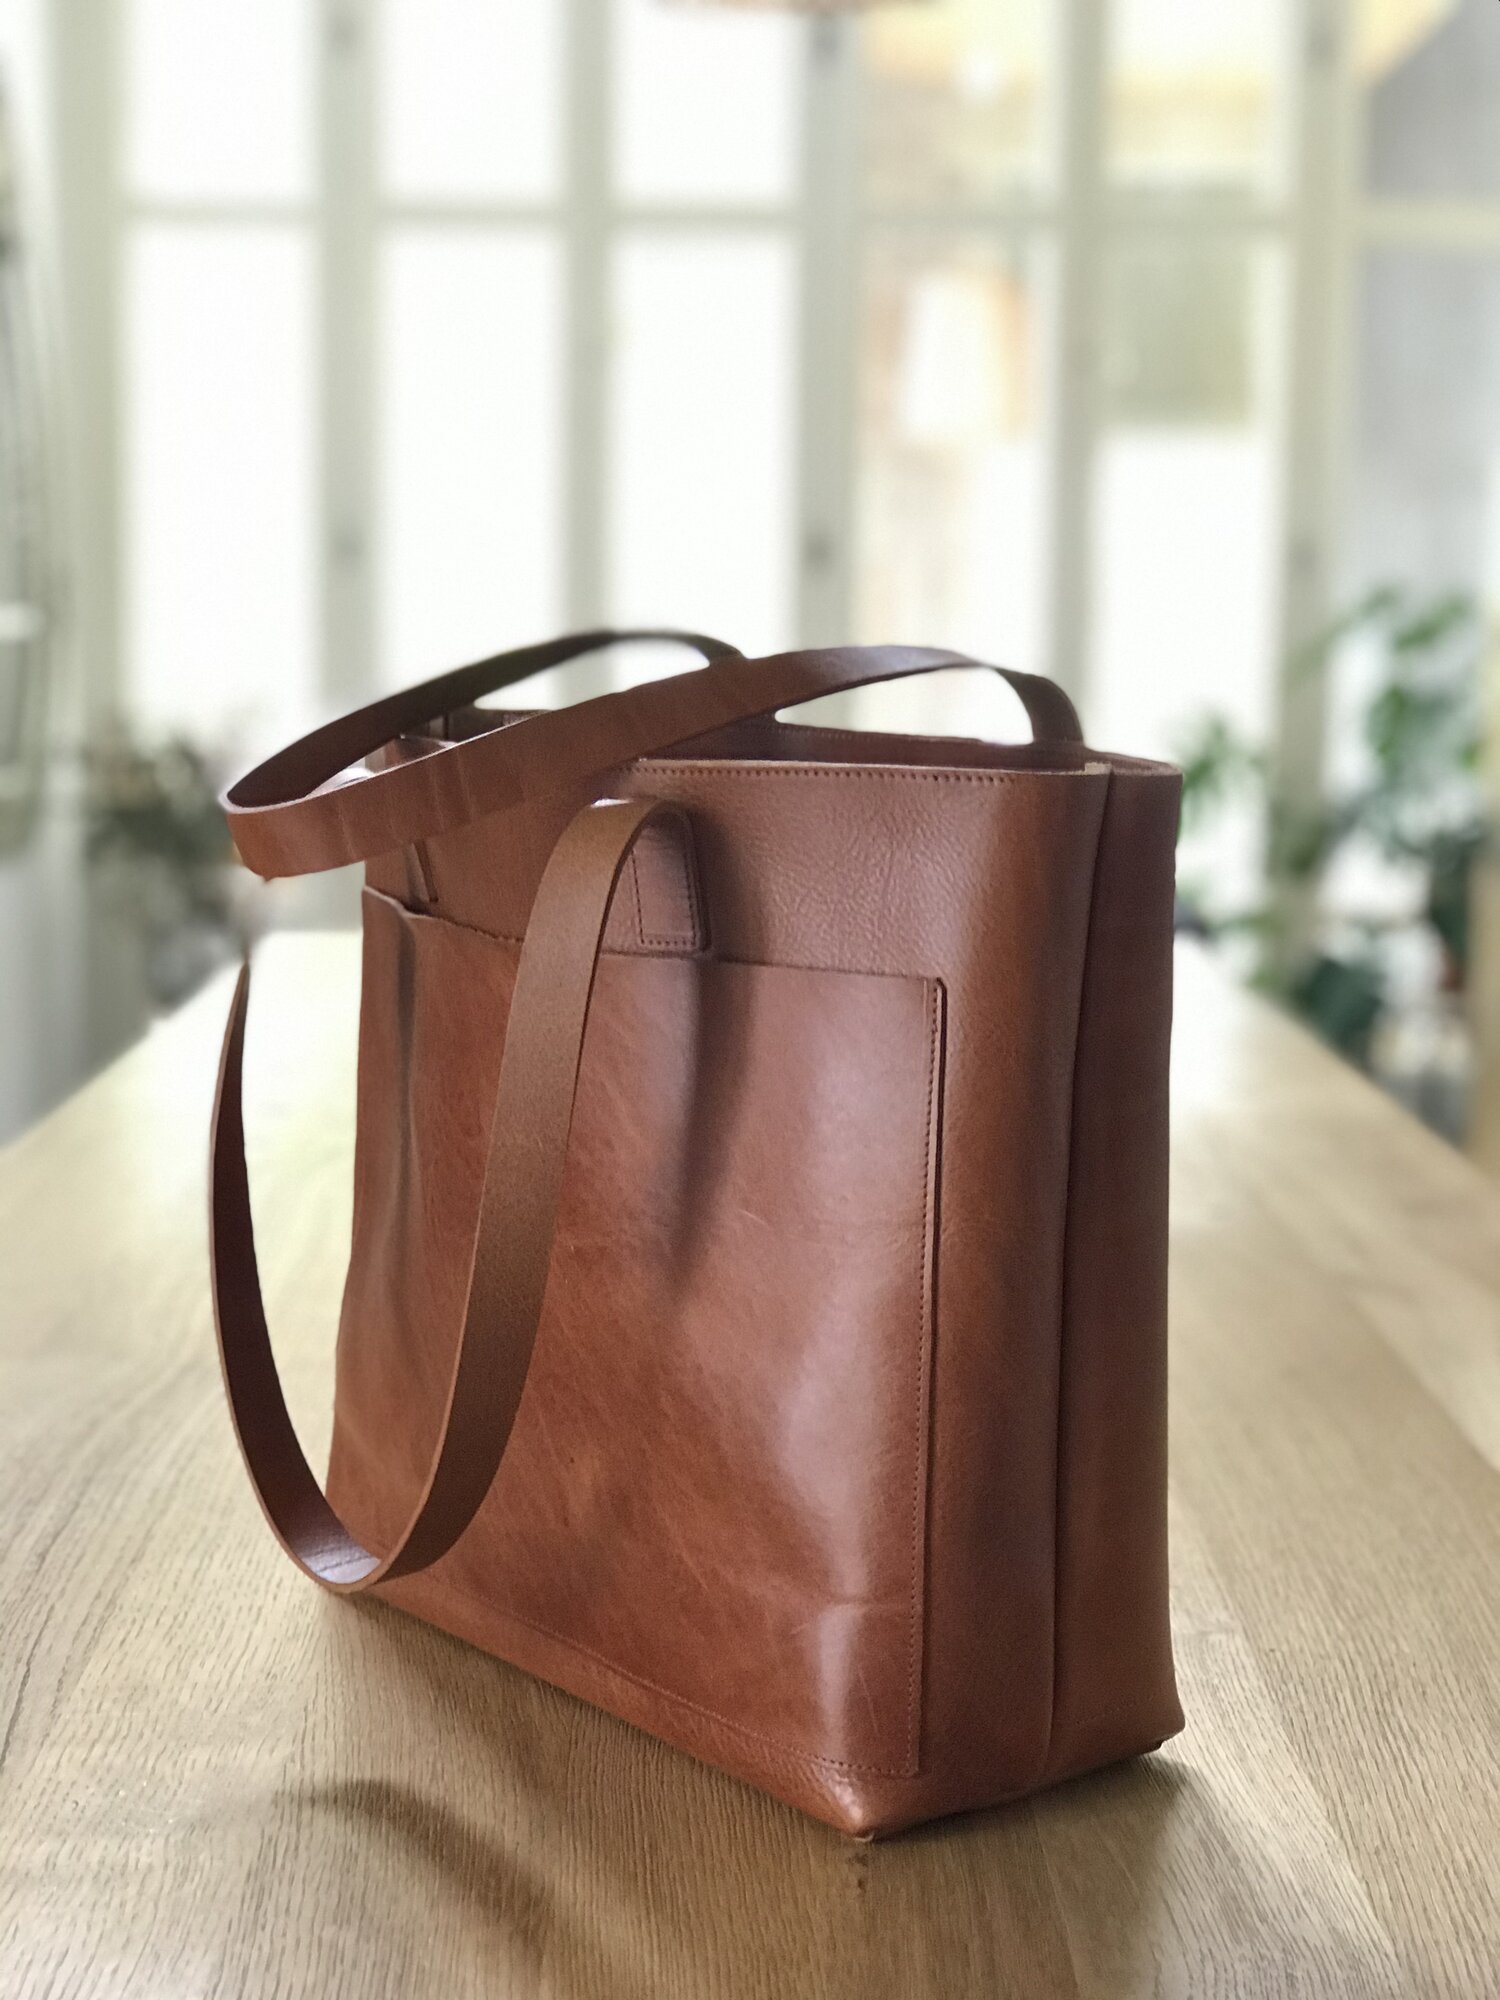 Tote Bags for Women, Leather Tote Bag